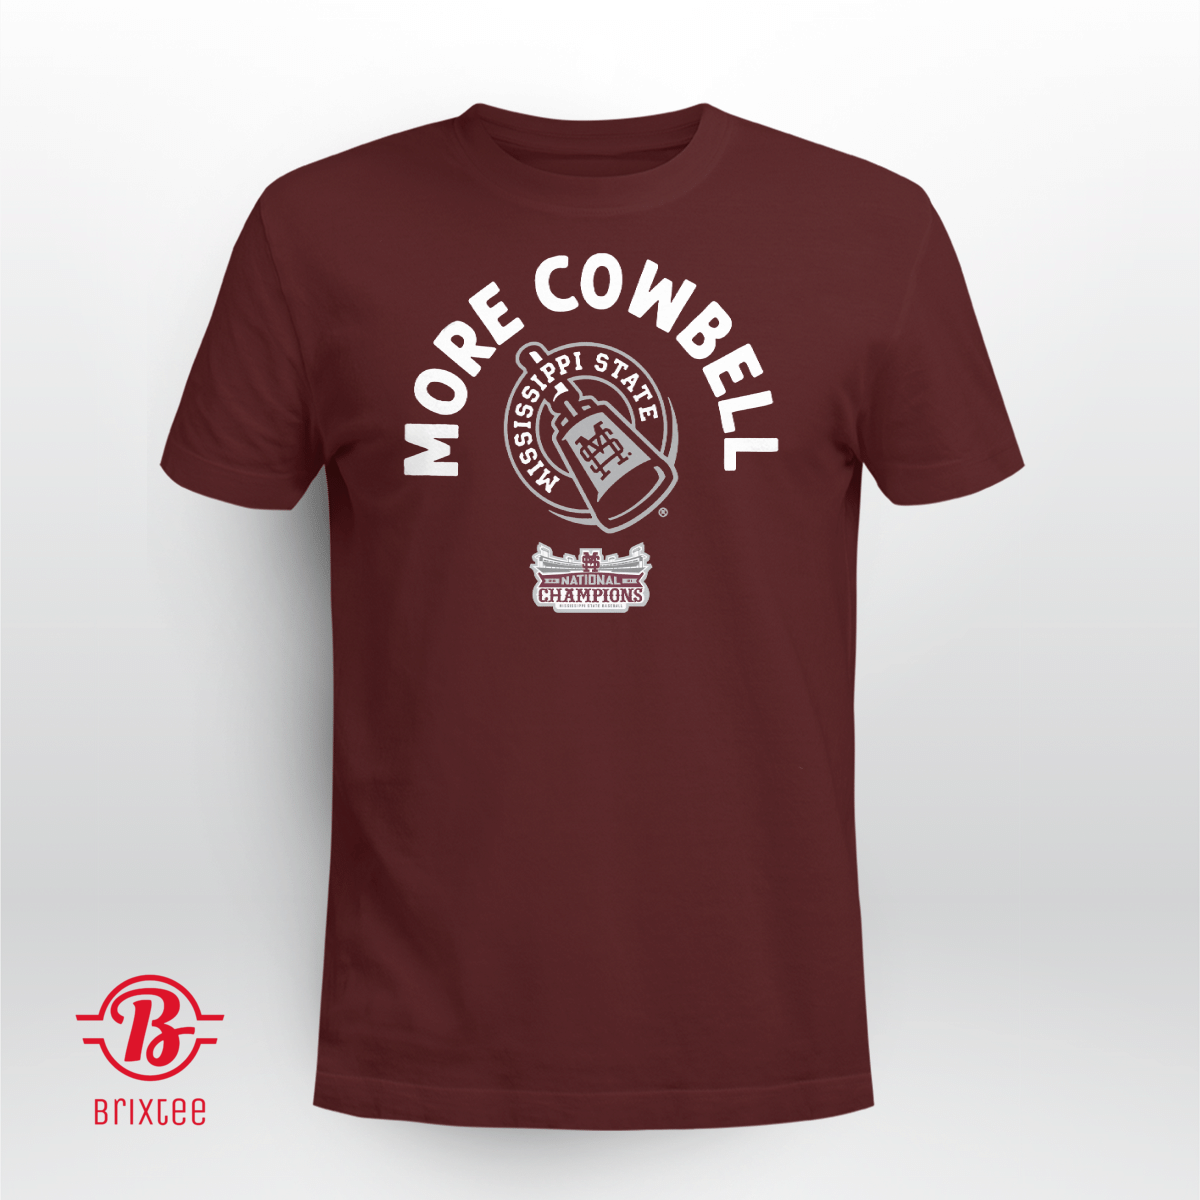 Mississippi State: More Cowbell